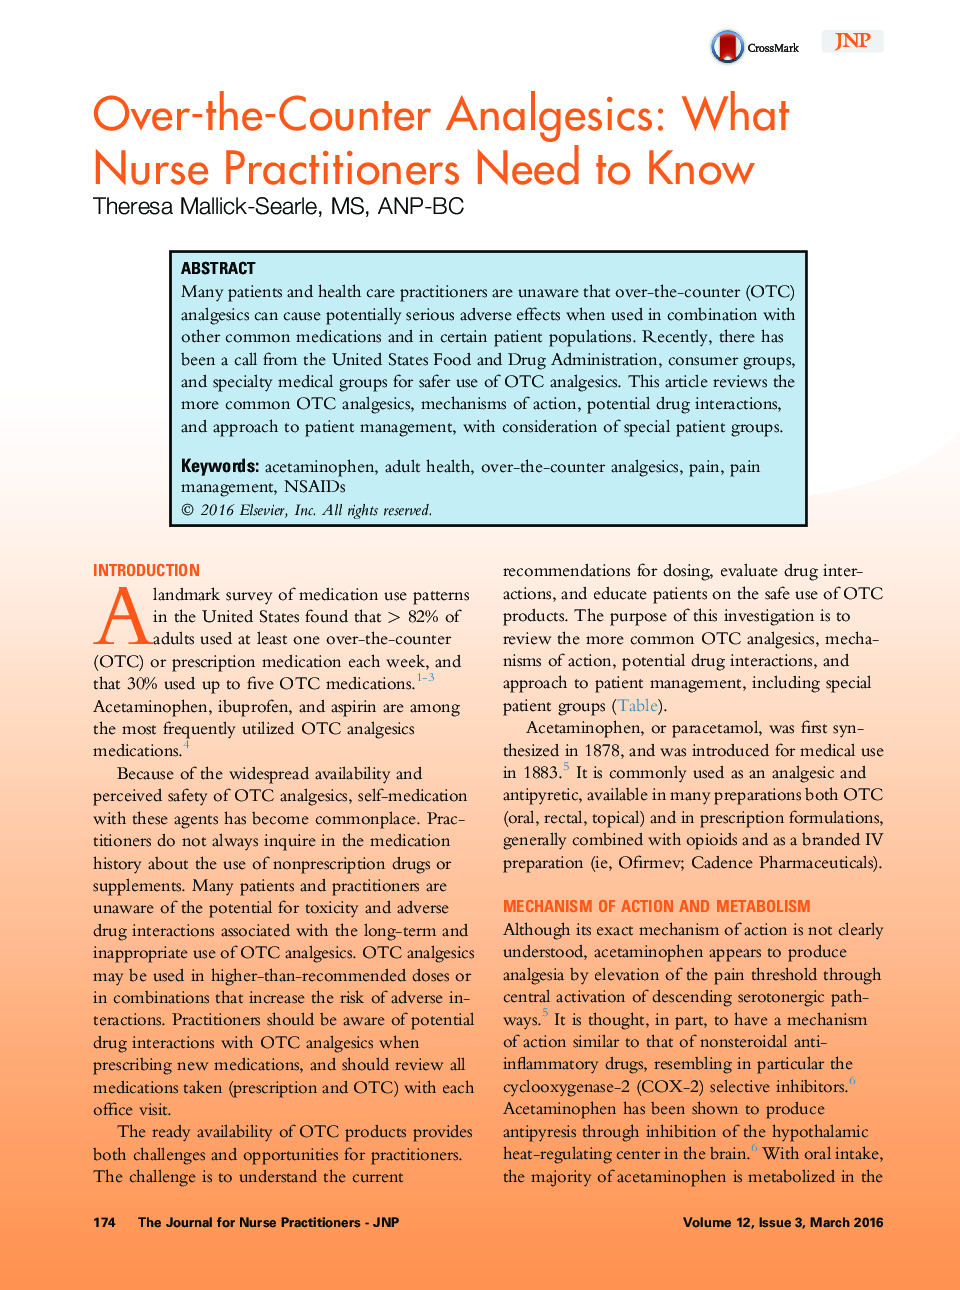 Over-the-Counter Analgesics: What Nurse Practitioners Need to Know 